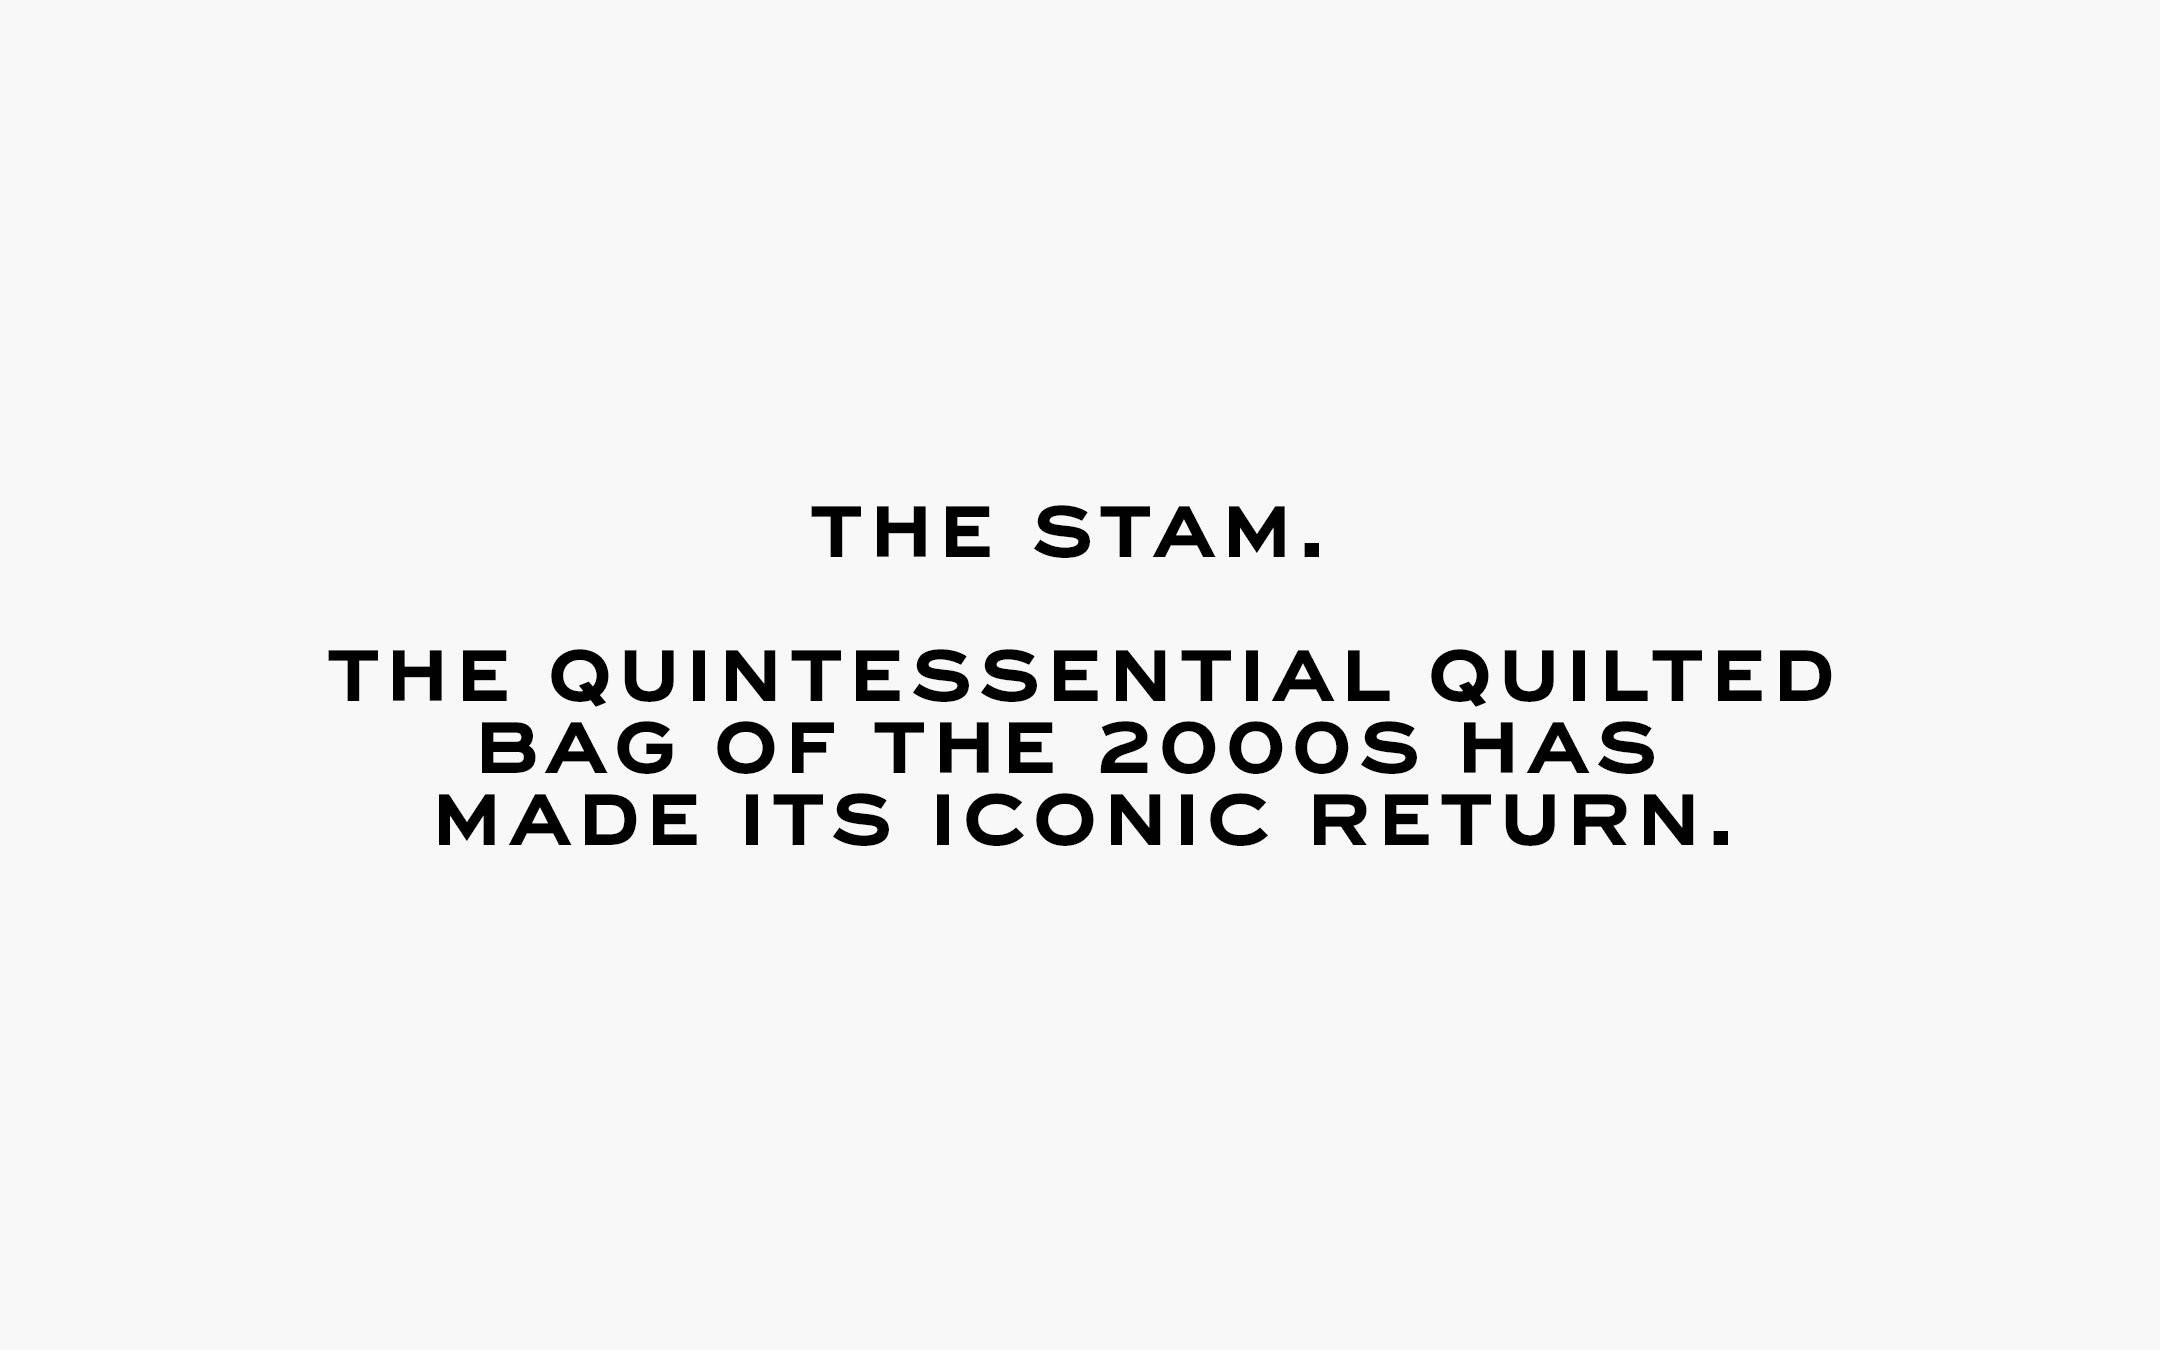 The Stam. The Quintessential quilted bag of the 2000s has made its iconic return